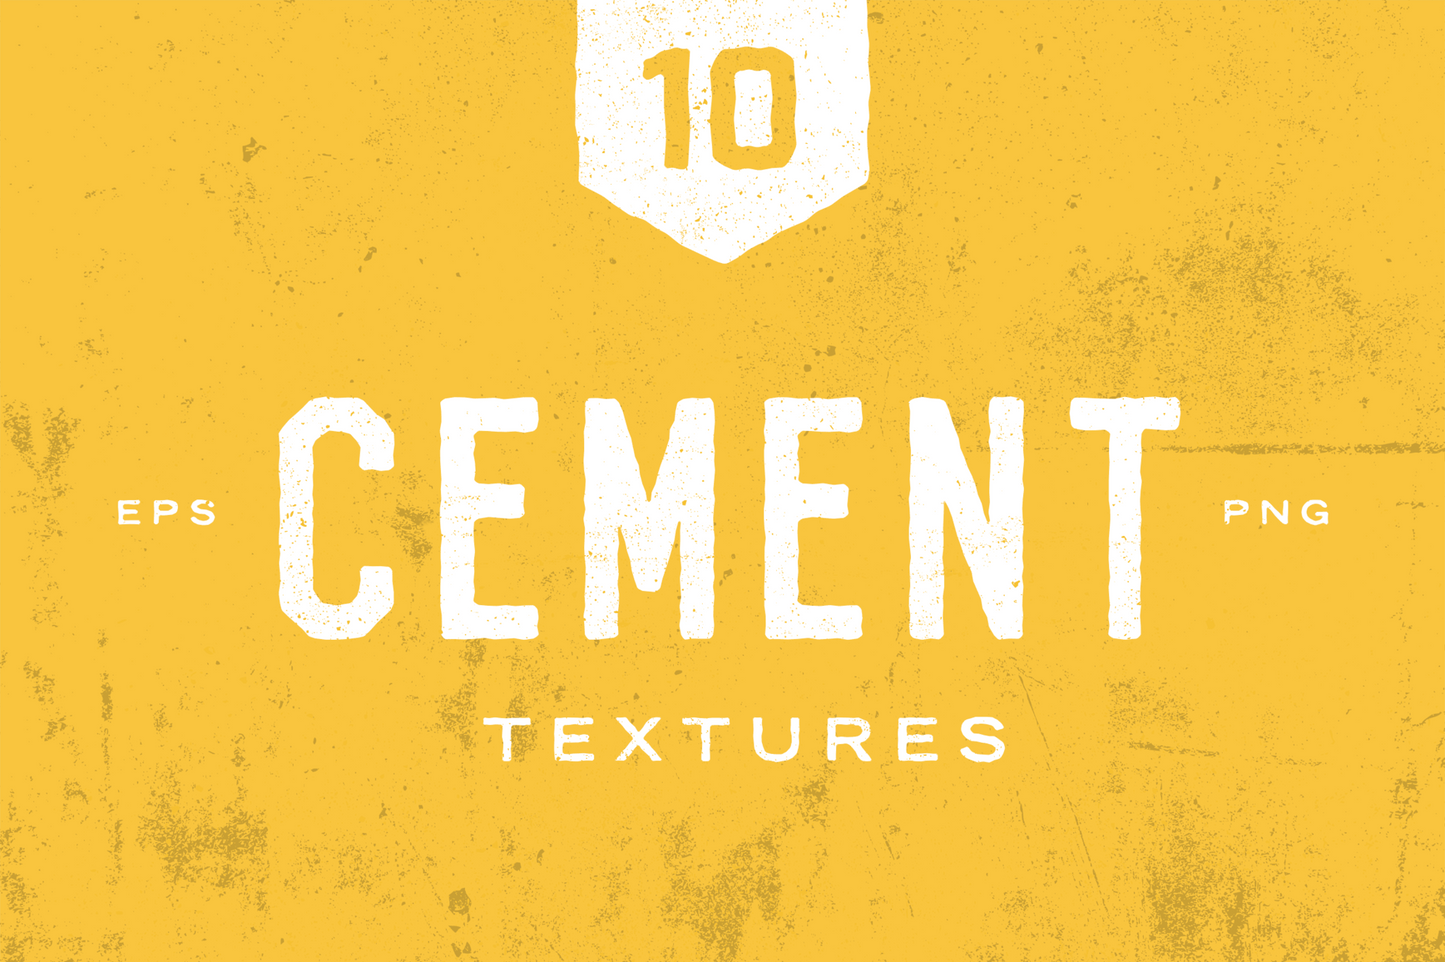 Gritty cement textures